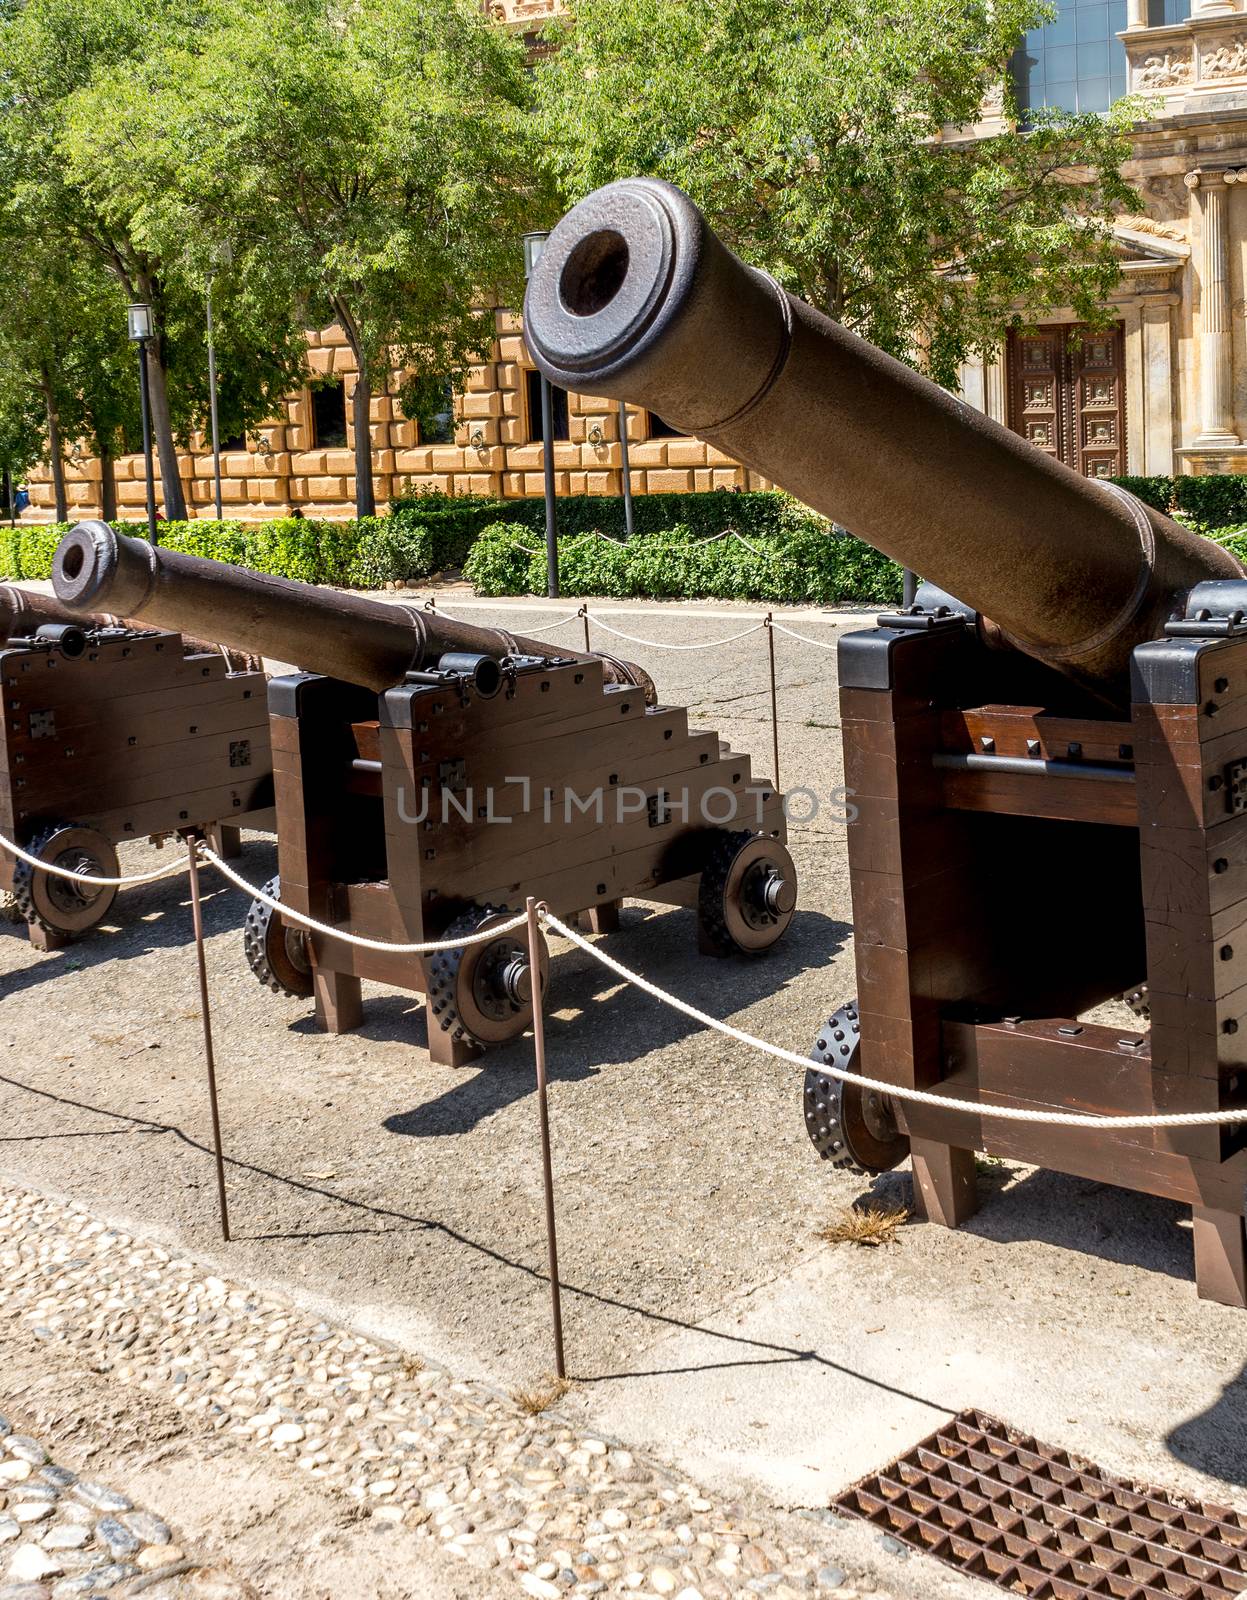 Black cannon at the Alhambra palace in Granada, Spain, Europe on a bright warm summer day